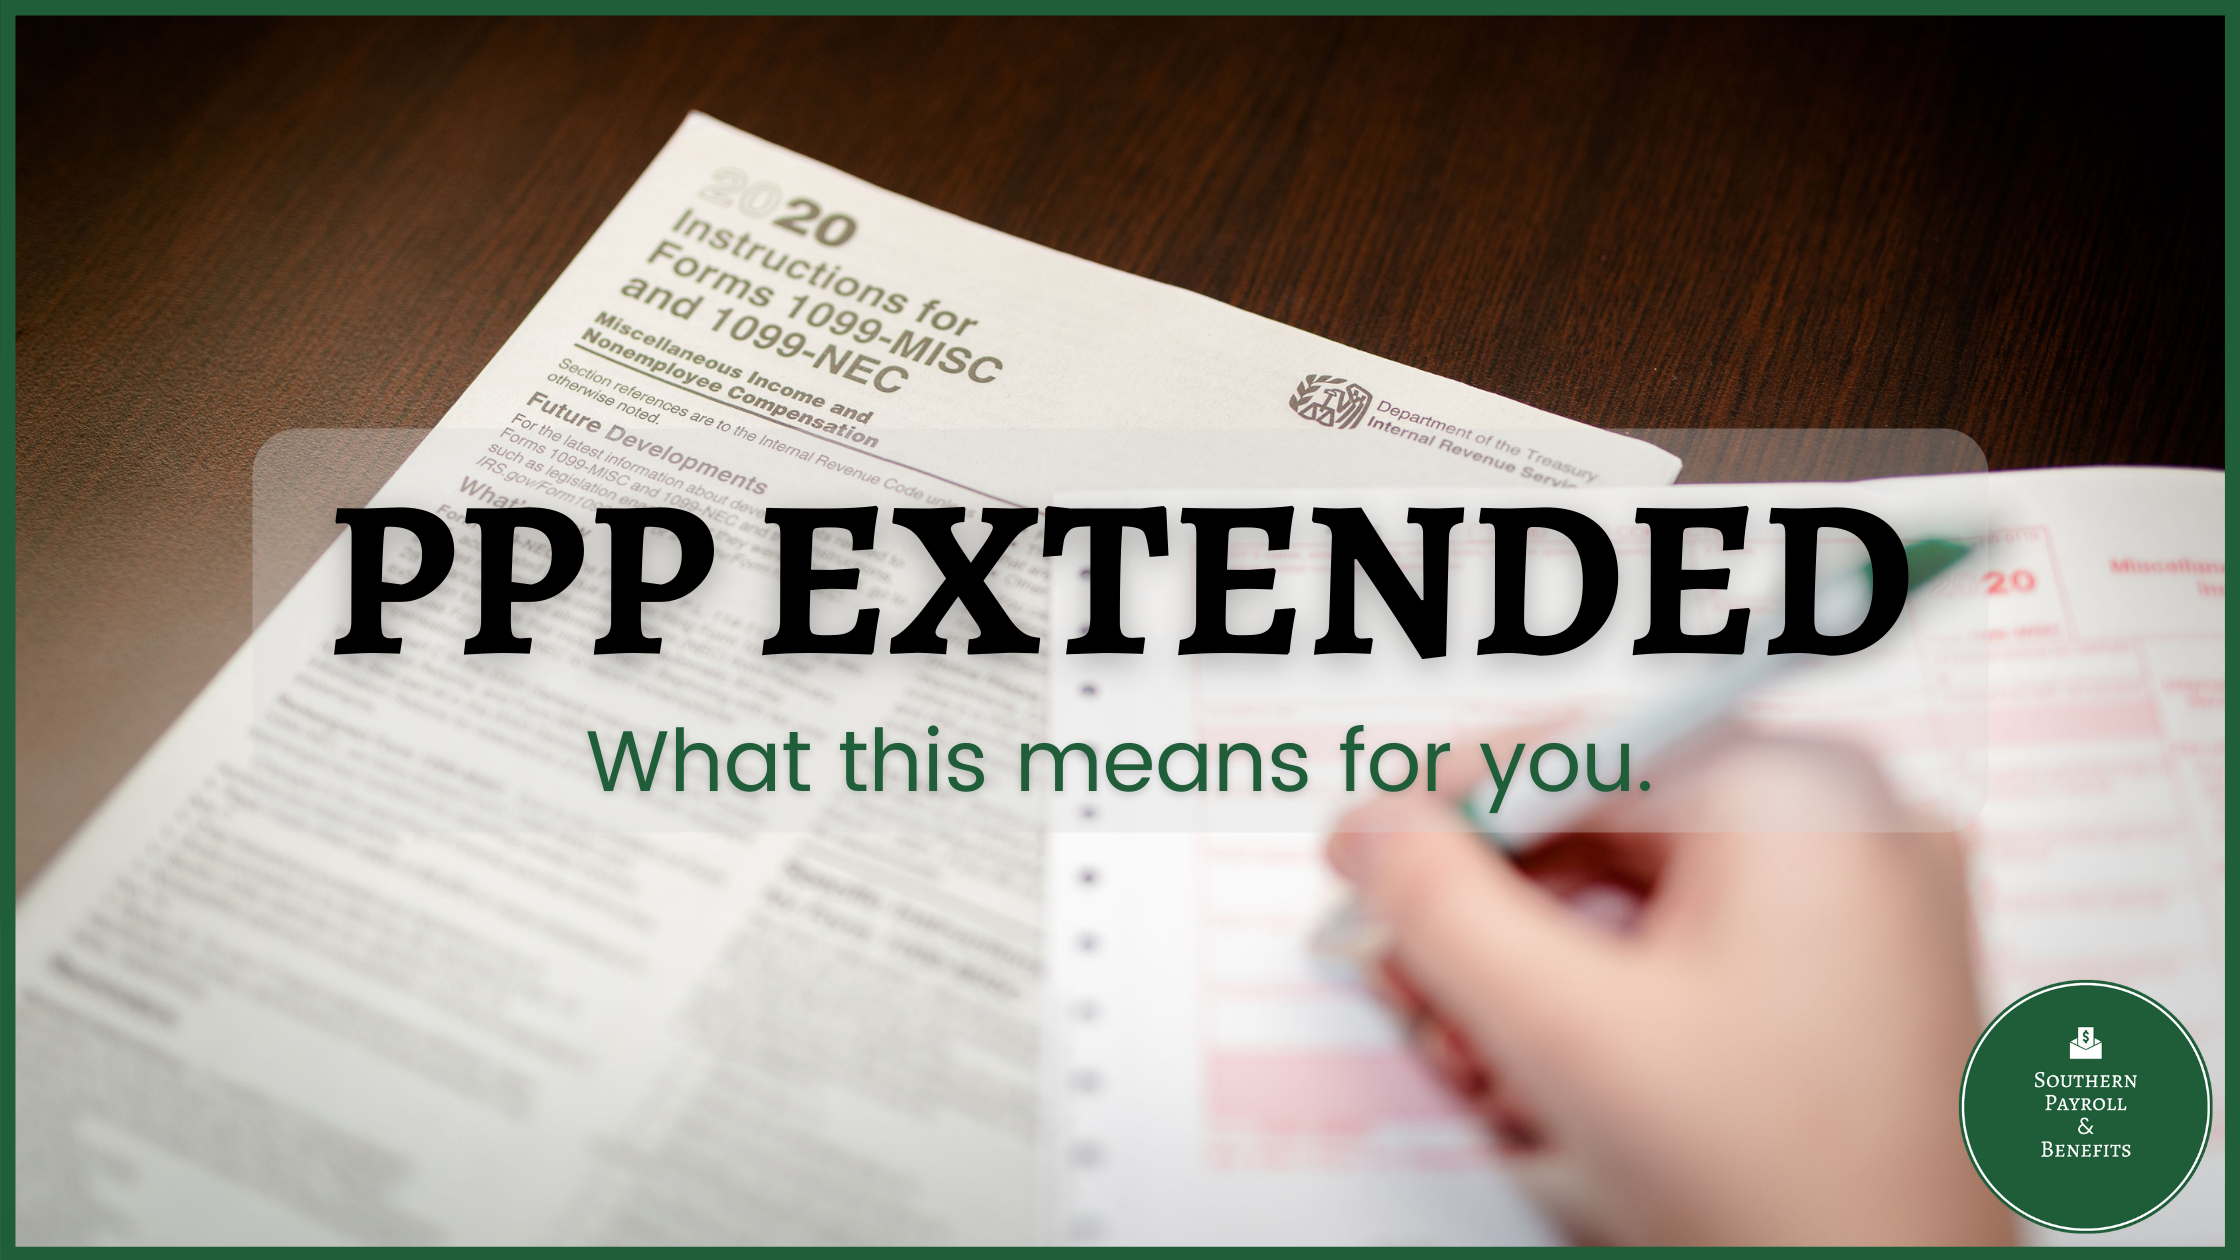 PPP Extended: What this means for you